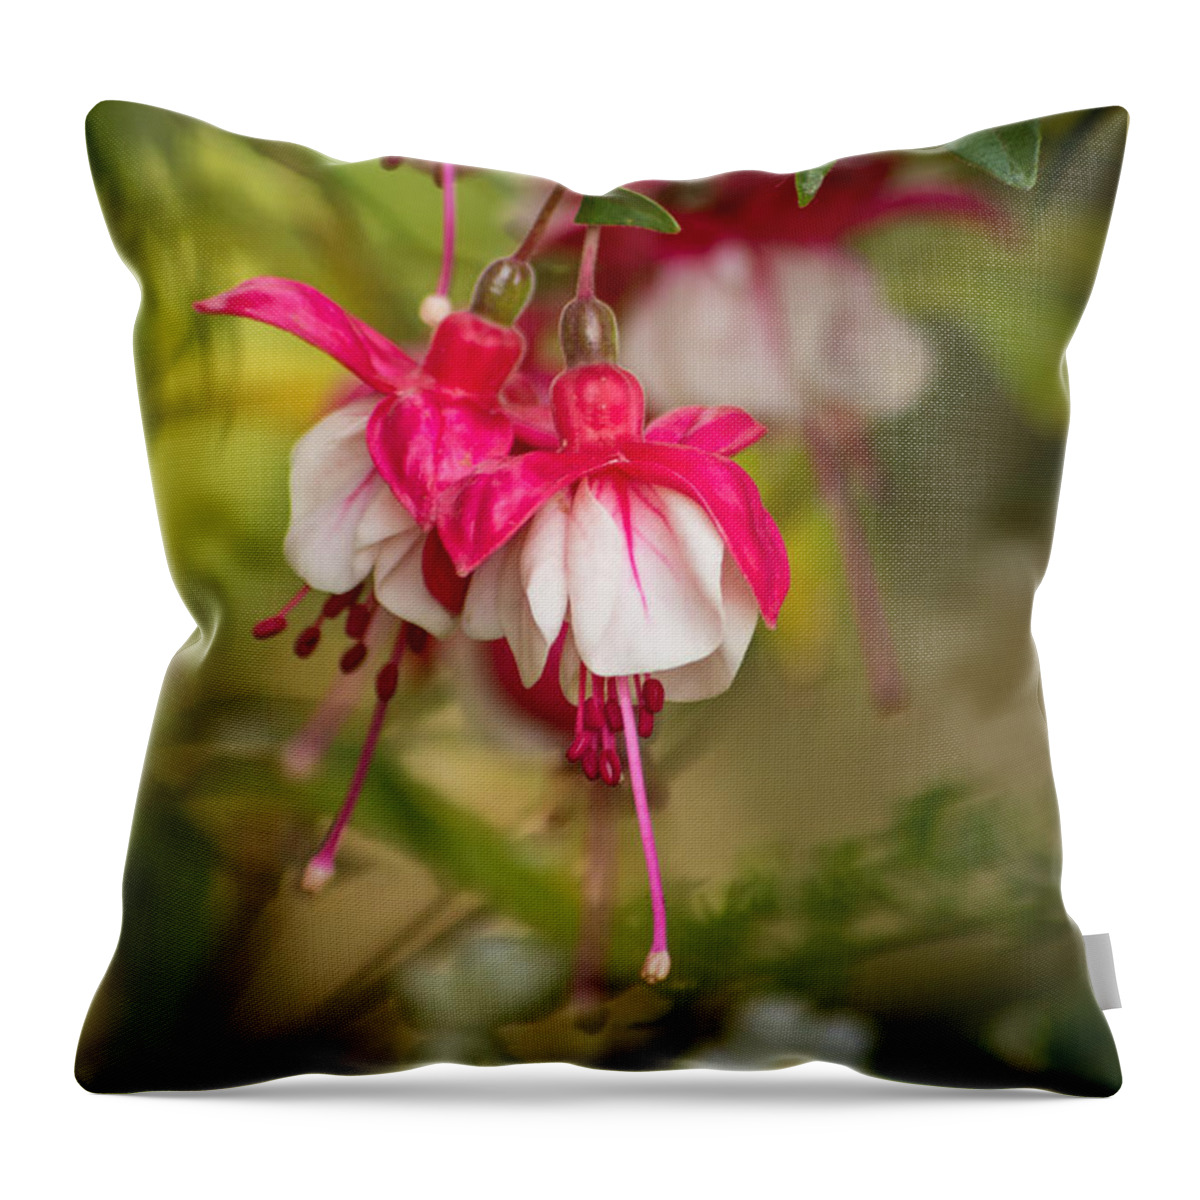 Fuchsia Throw Pillow featuring the photograph Evening Light by Marilyn Wilson